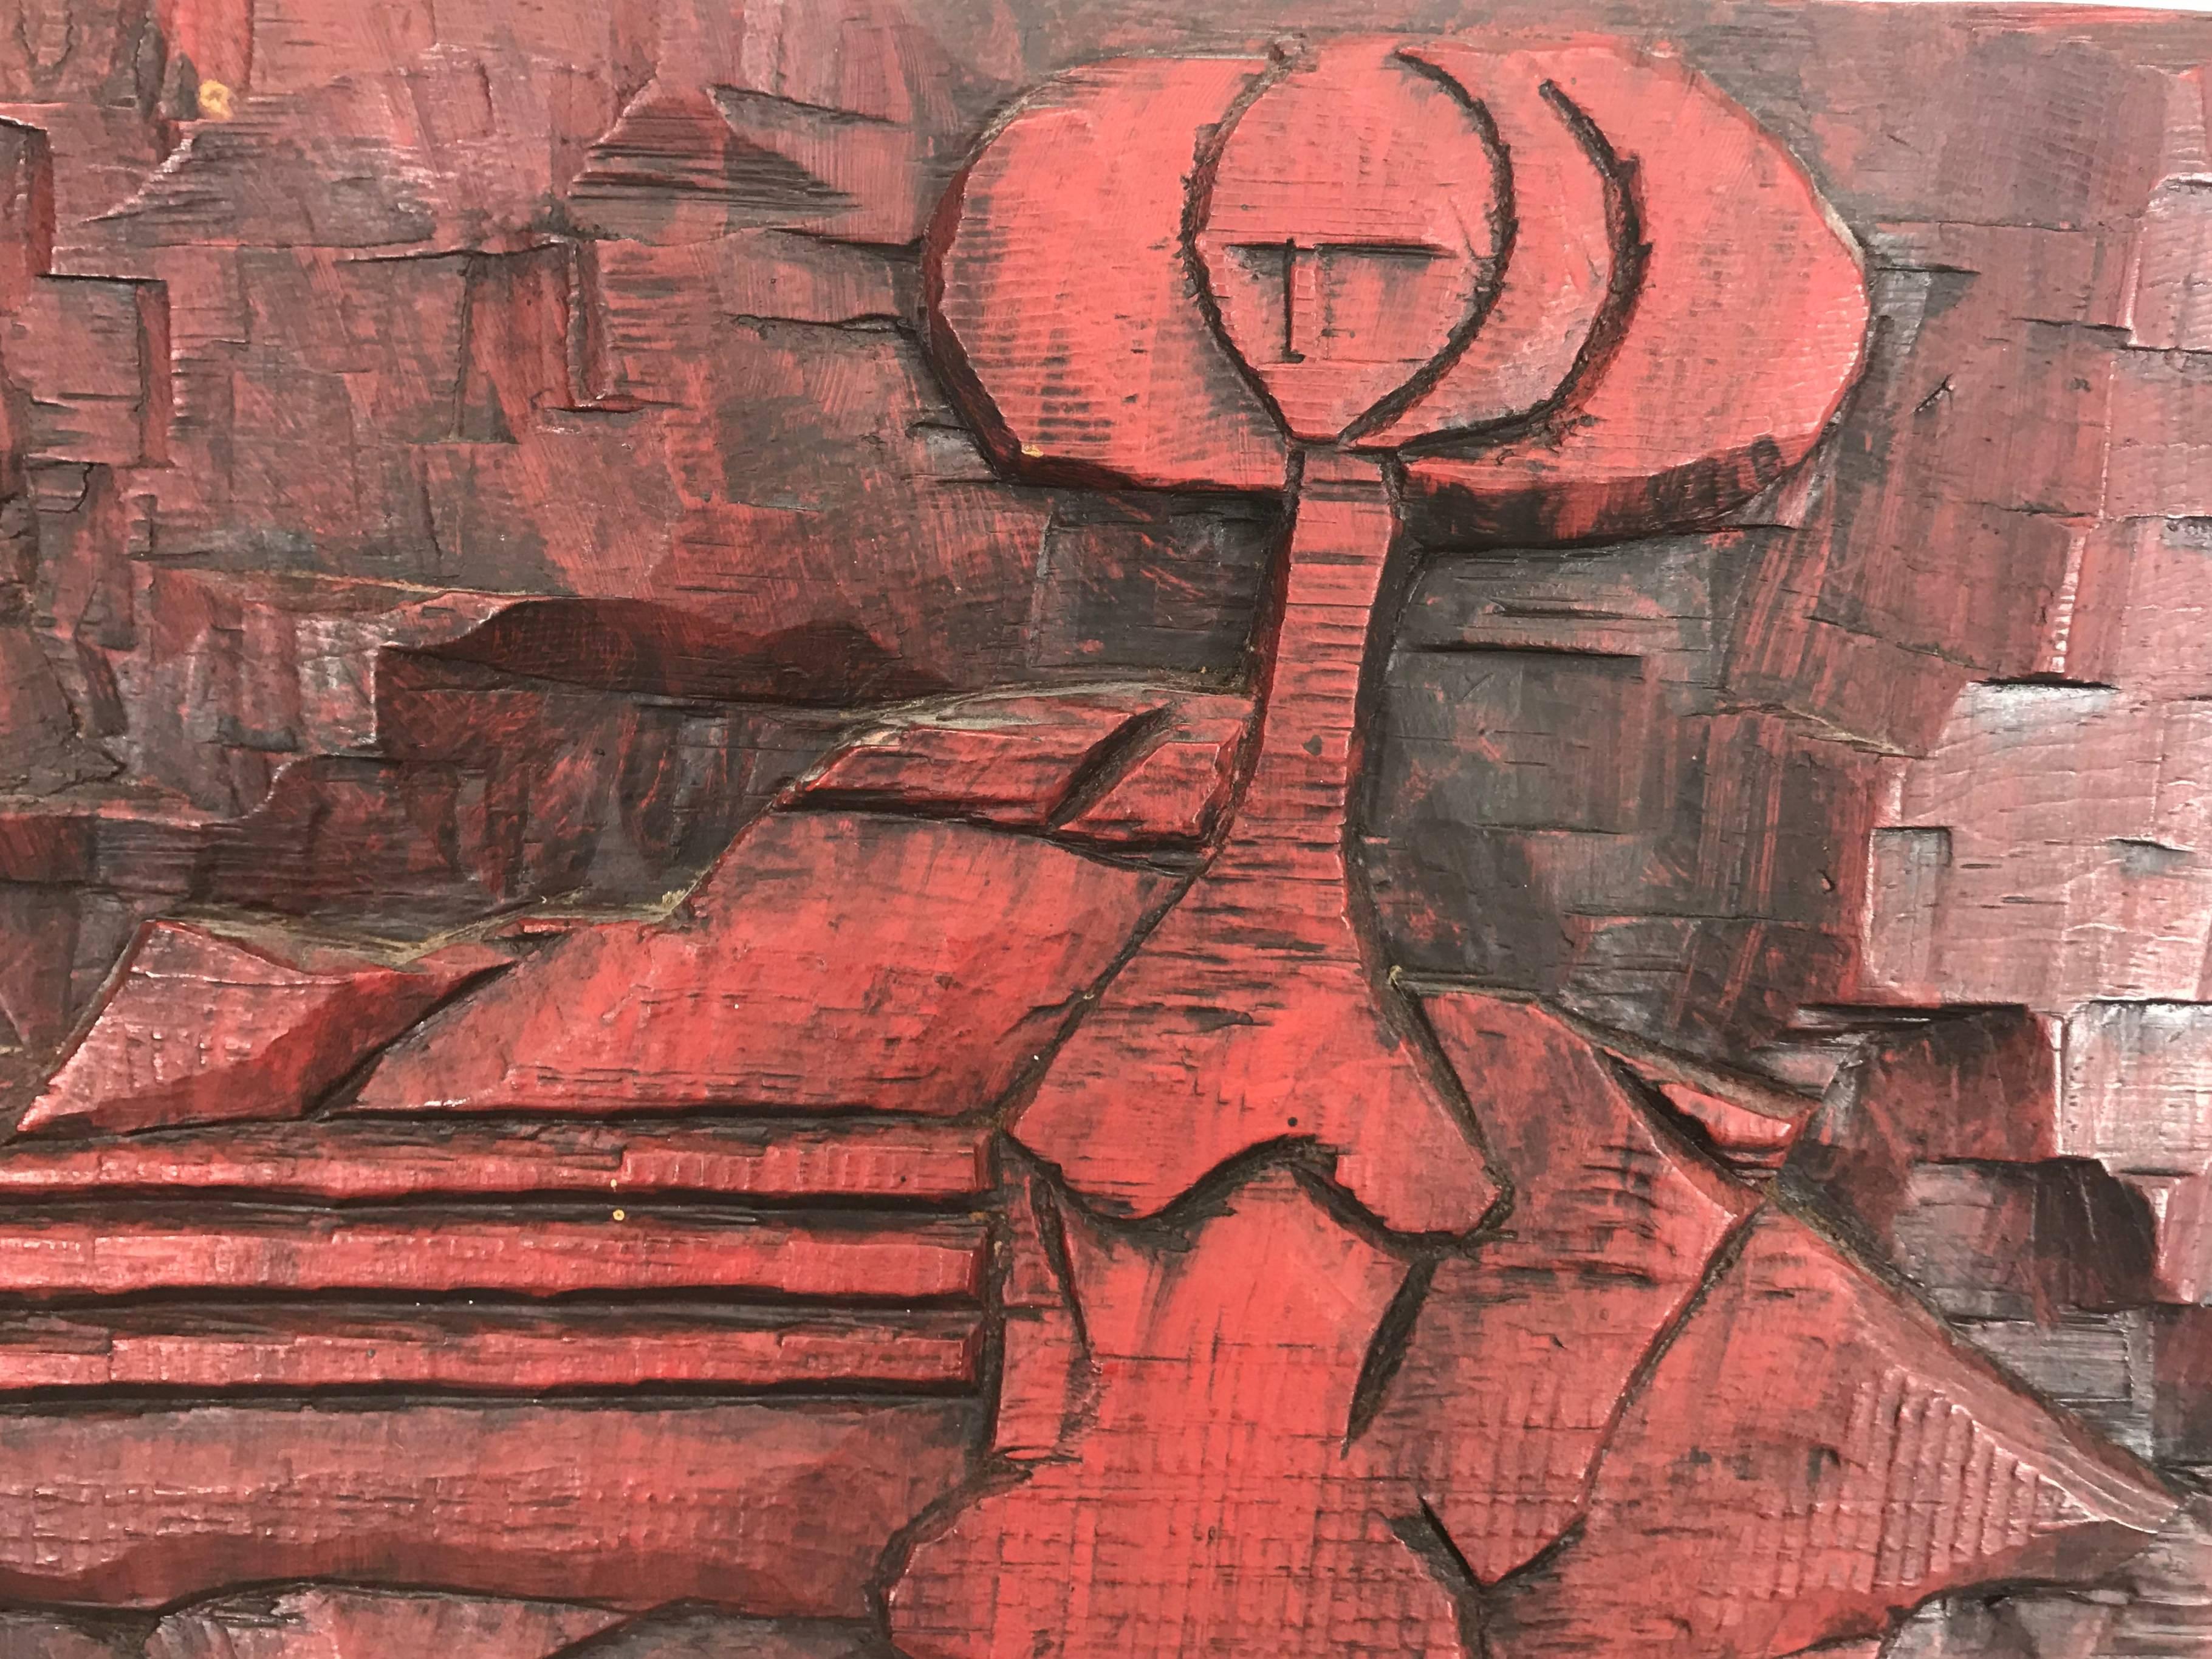 Jean Claude Gaugy Modernist Abstract Wood Carving..signed on reverse,,Amazing use of color, texture,dimention and space.
French Artist Jean Claude GaugyThere is an underlying unity in the universe, Jean-Claude Gaugy believes. The constant quality